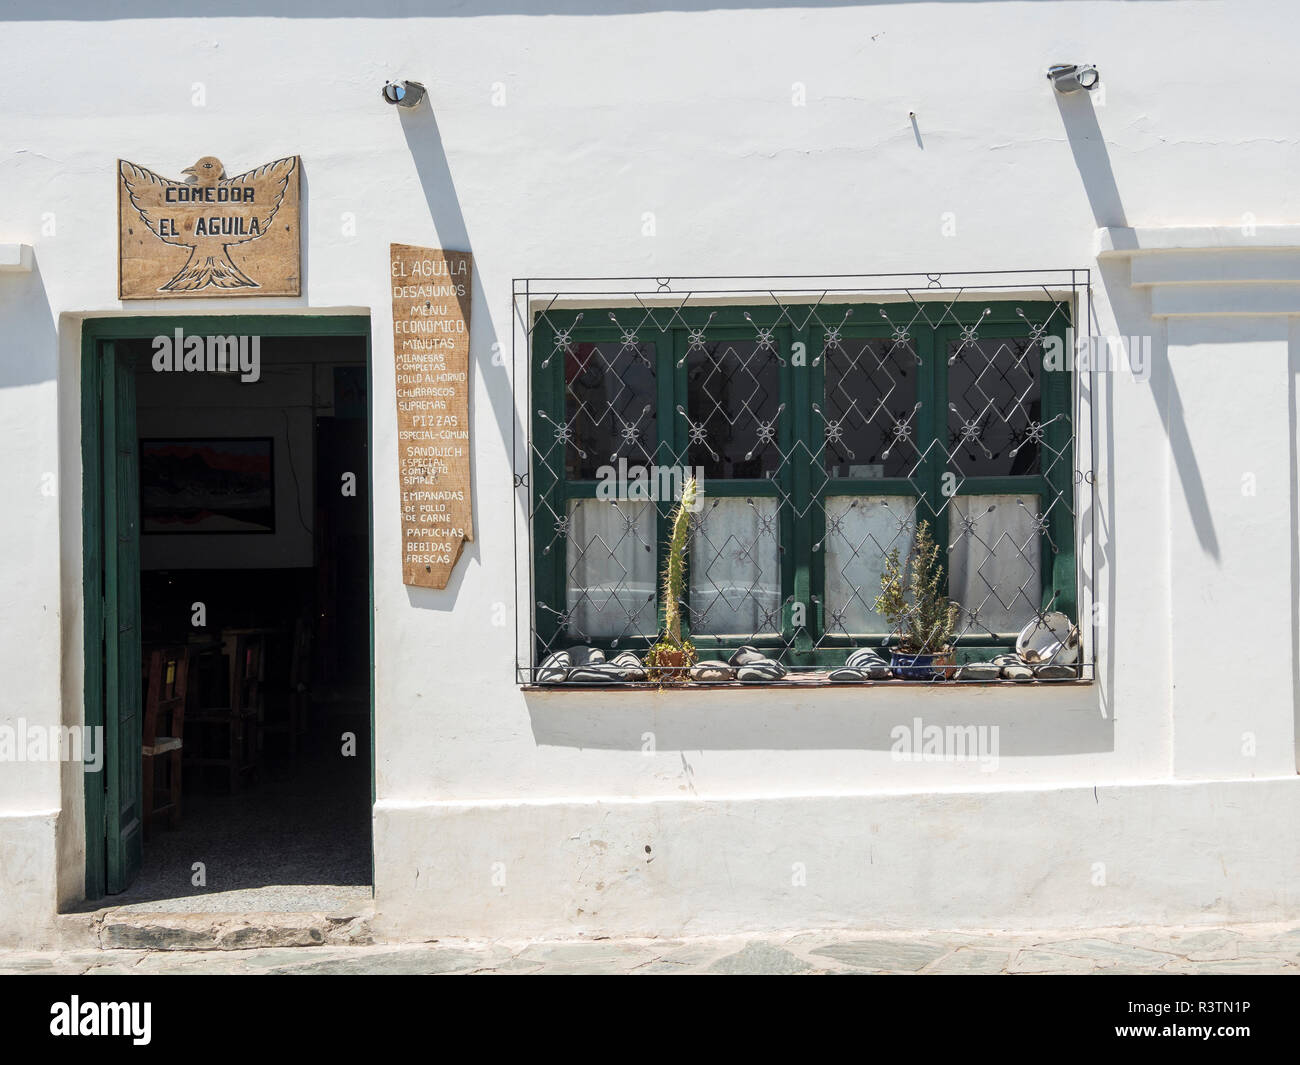 Restaurant. Small town of Cachi in the Valles Calchaquies region, Salta Province. South America, Argentina (Editorial Use Only) Stock Photo